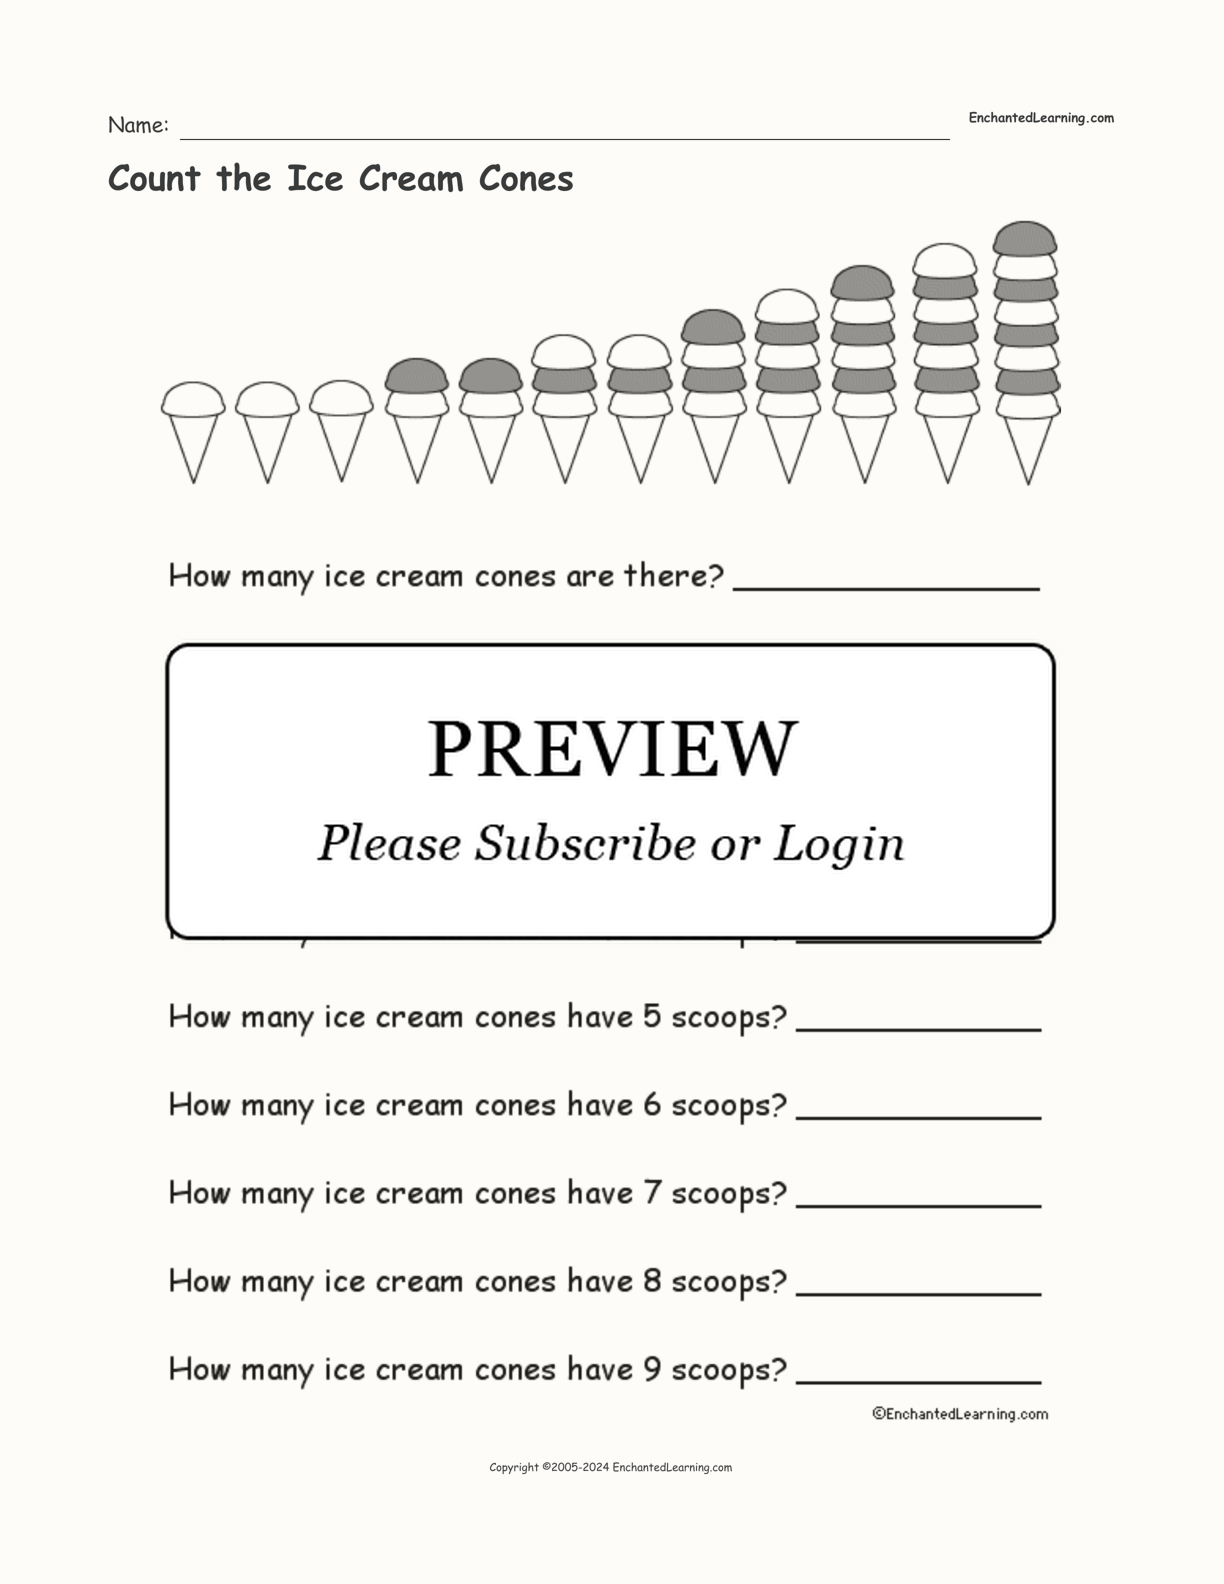 Count the Ice Cream Cones interactive worksheet page 1